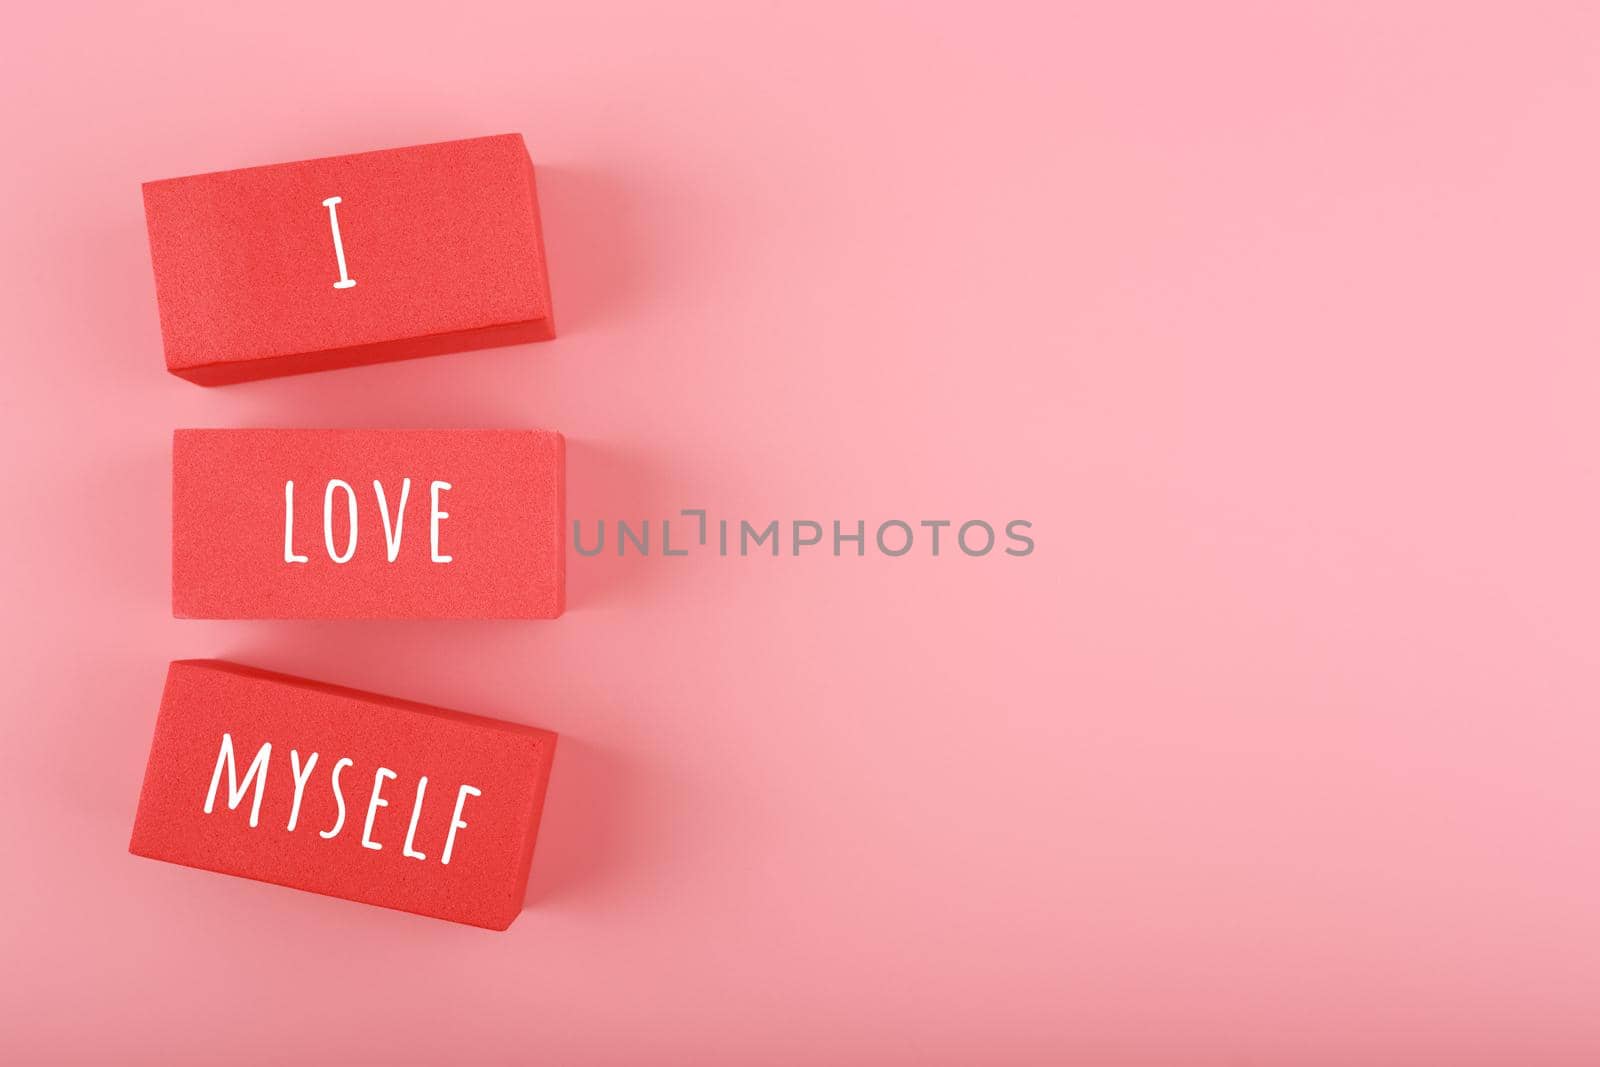 Minimal trendy concept of mental health and self love and acceptance. I love myself written on red toy rectangles in a row against bright pink background with copy space